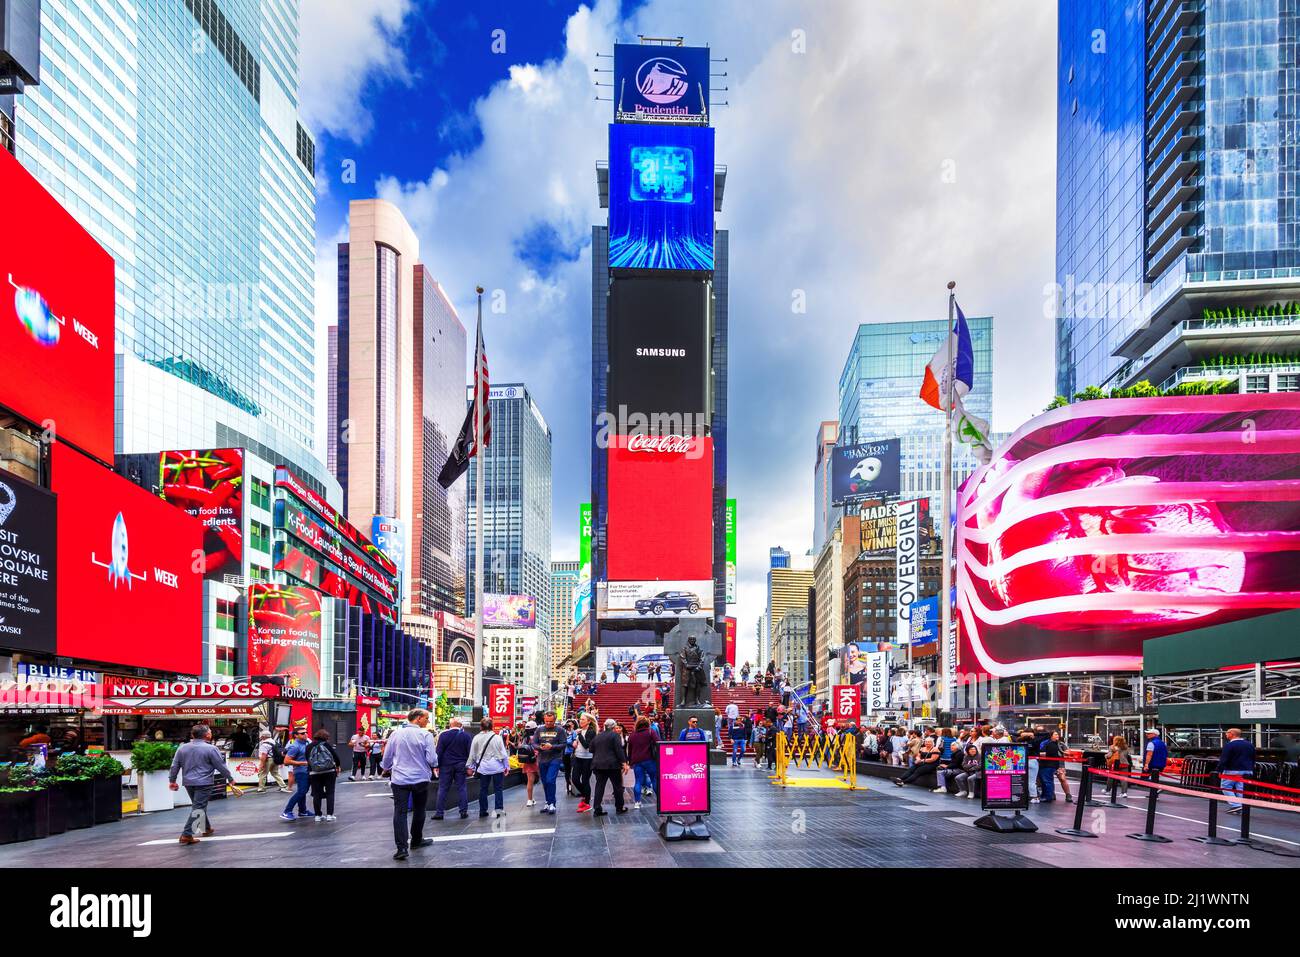 New York, USA - September 2019: Manhattan spotlight, Times Square, iconic place with illuminated billboards of famous corporations, New York City and Stock Photo